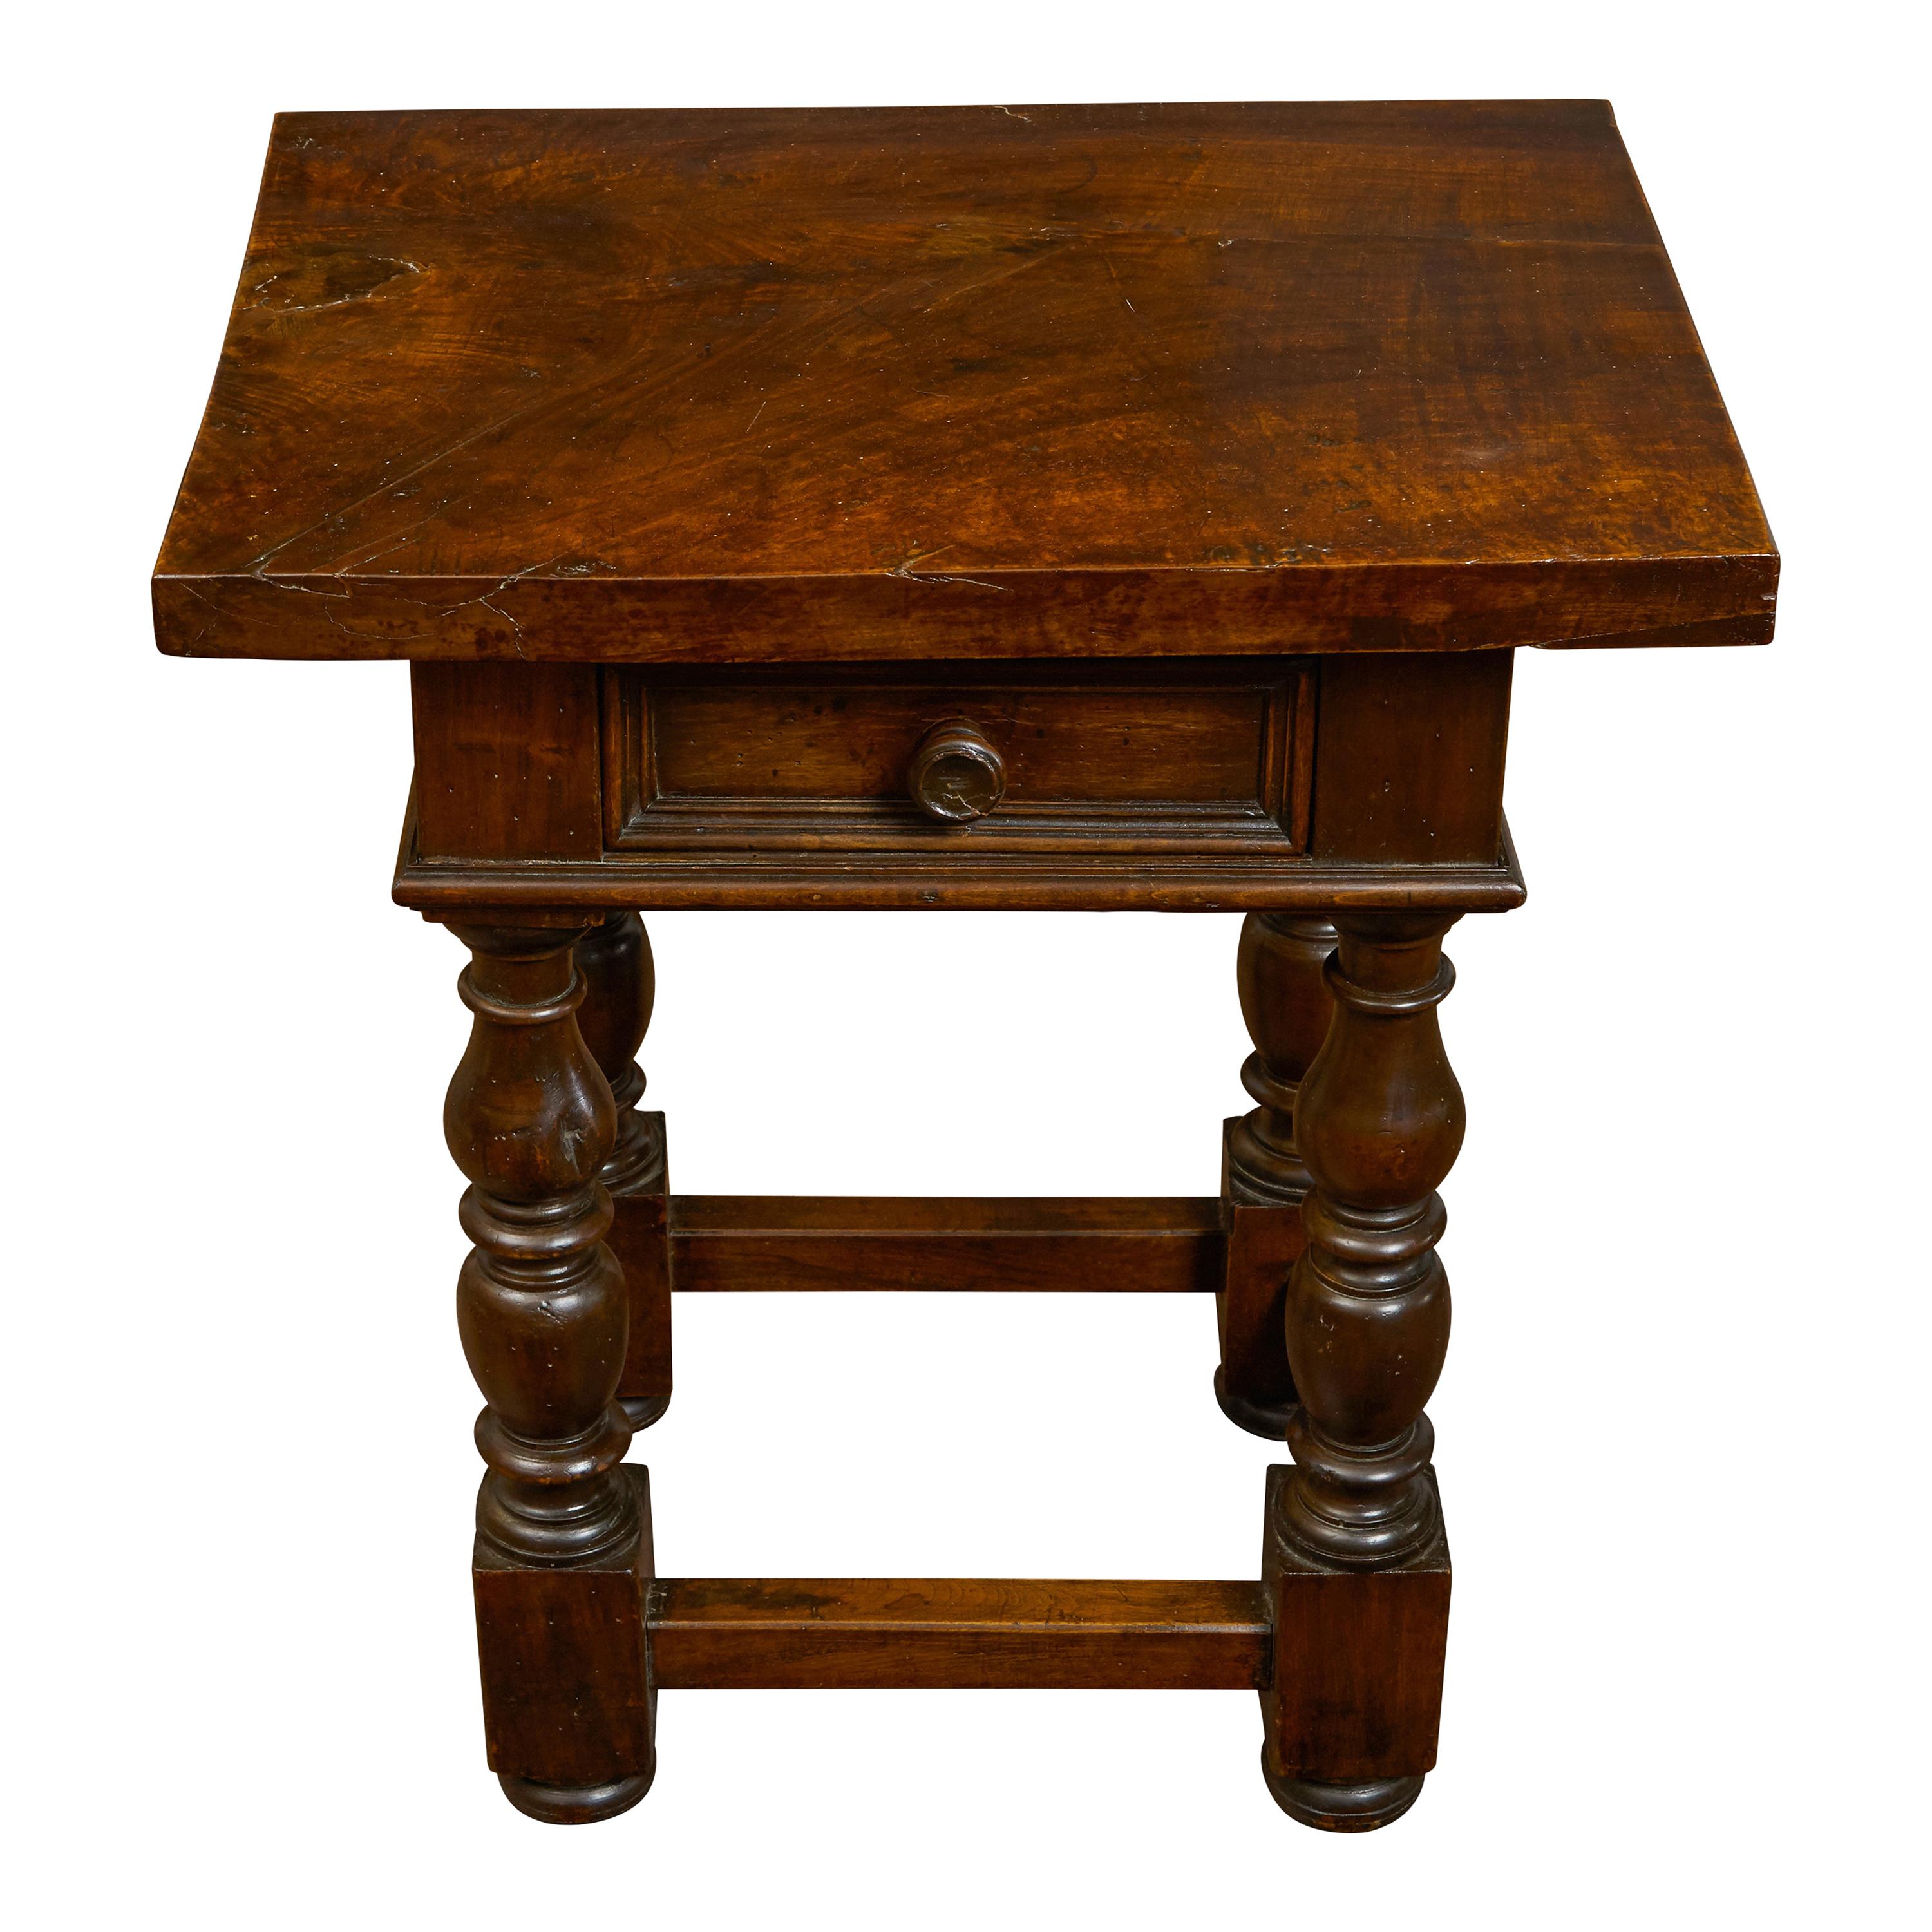 Italian 1800s Walnut Side Table with Single Drawer, Turned Legs and Stretchers